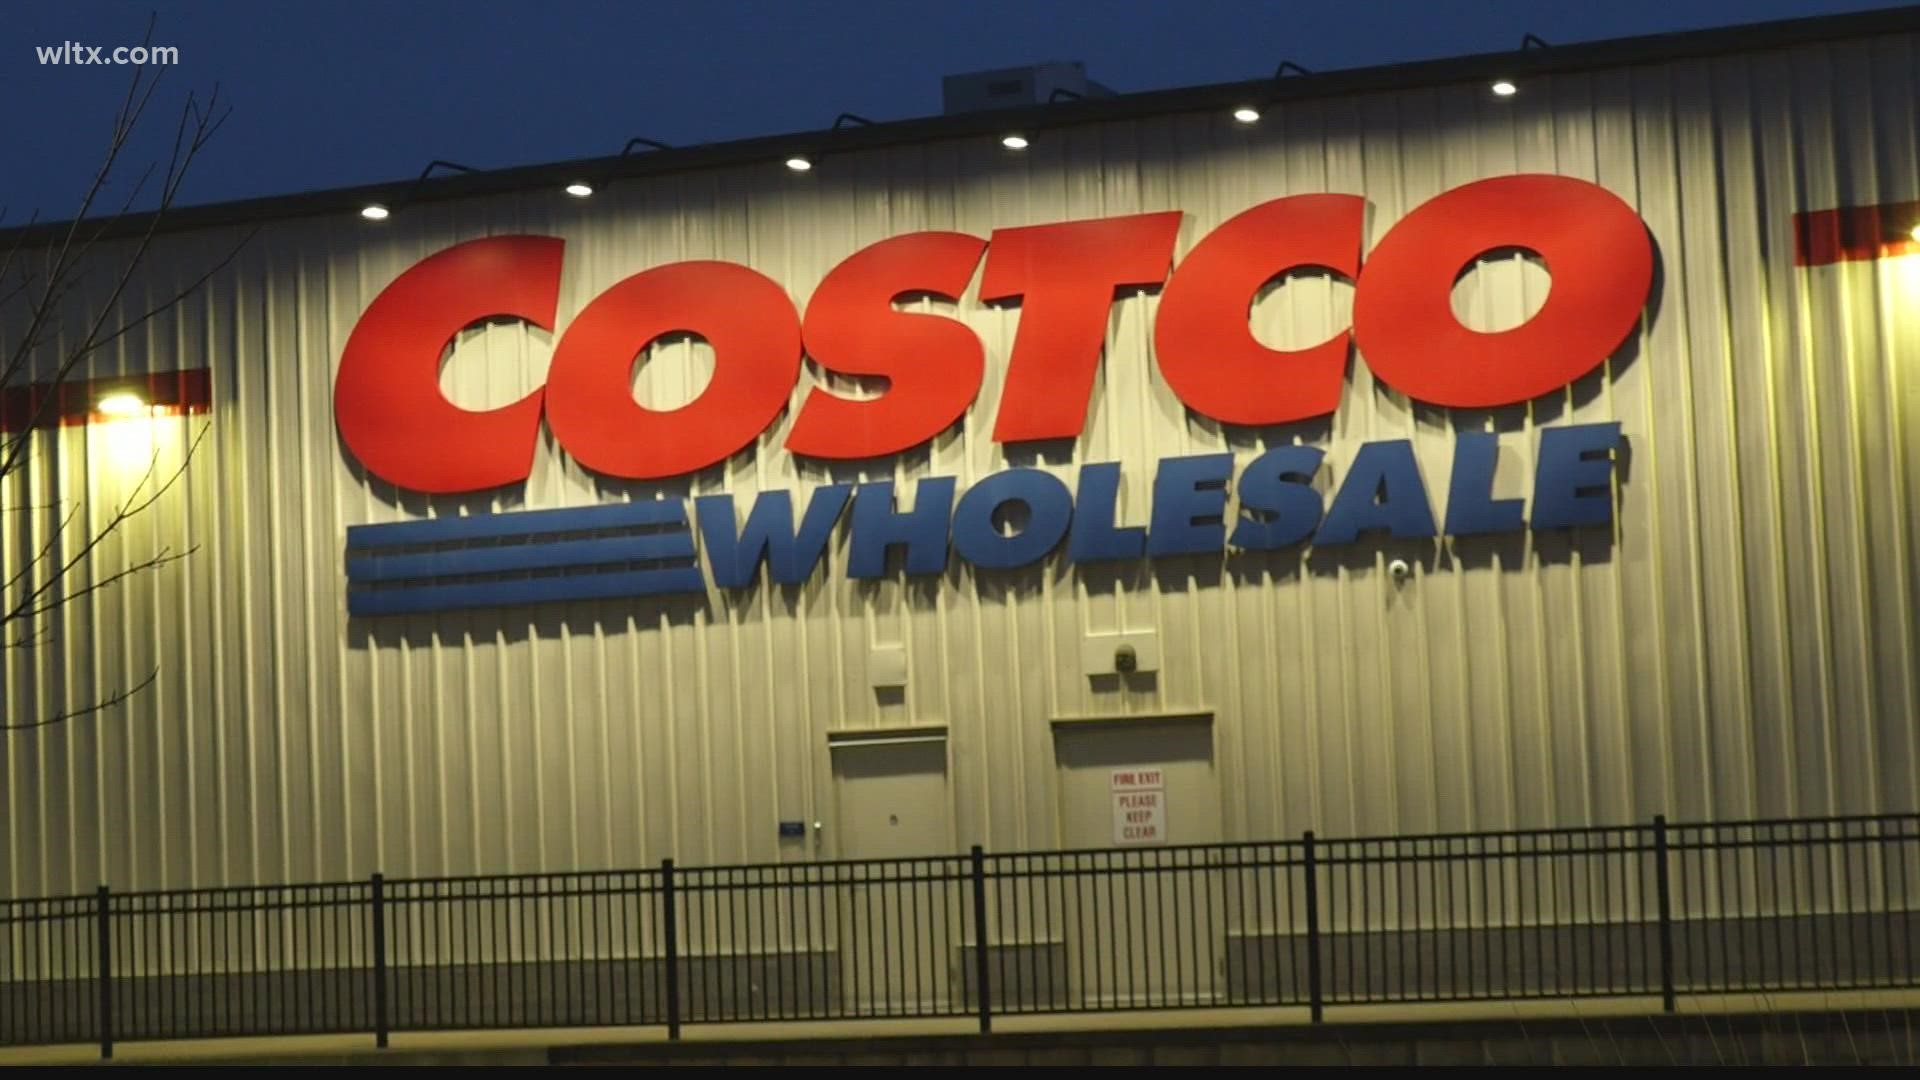 A woman has been charged with attempted murder after a shooting at a Costco near Harbison on Wednesday.